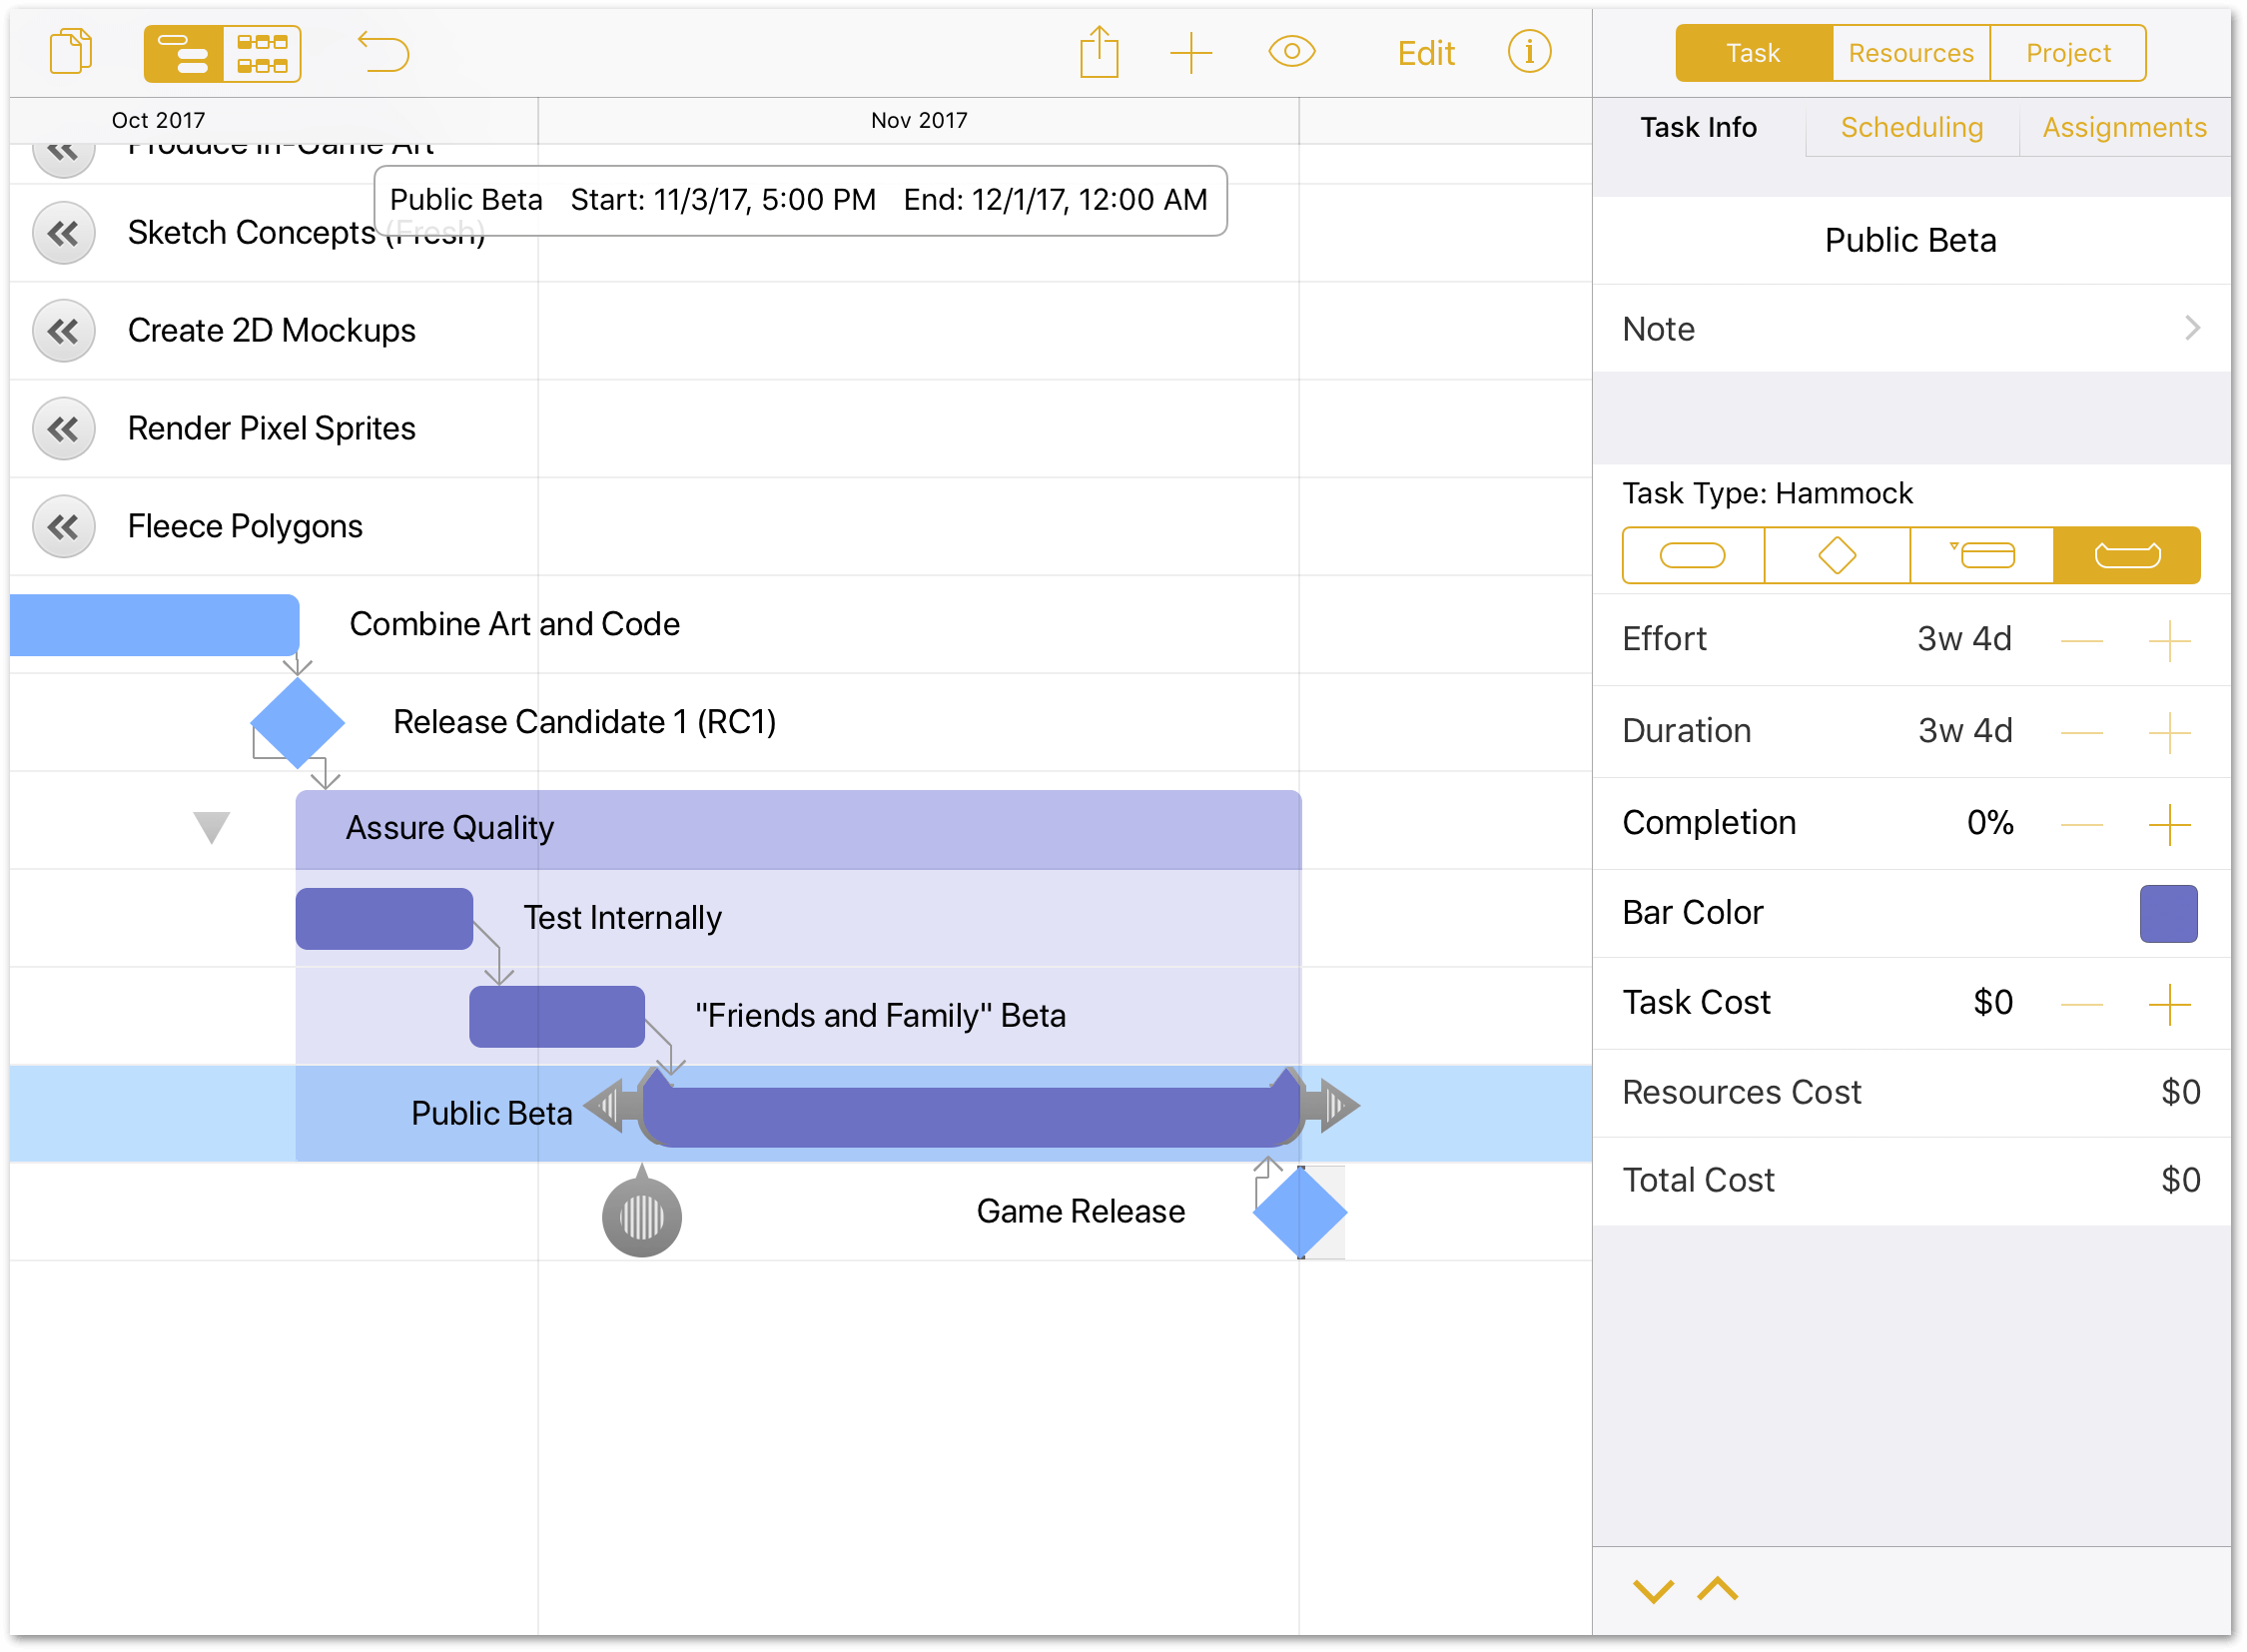 The Game Plan project now shows the Public Beta task as a hammock task that stretches to fill the gap of time until the Game Release date is reached.